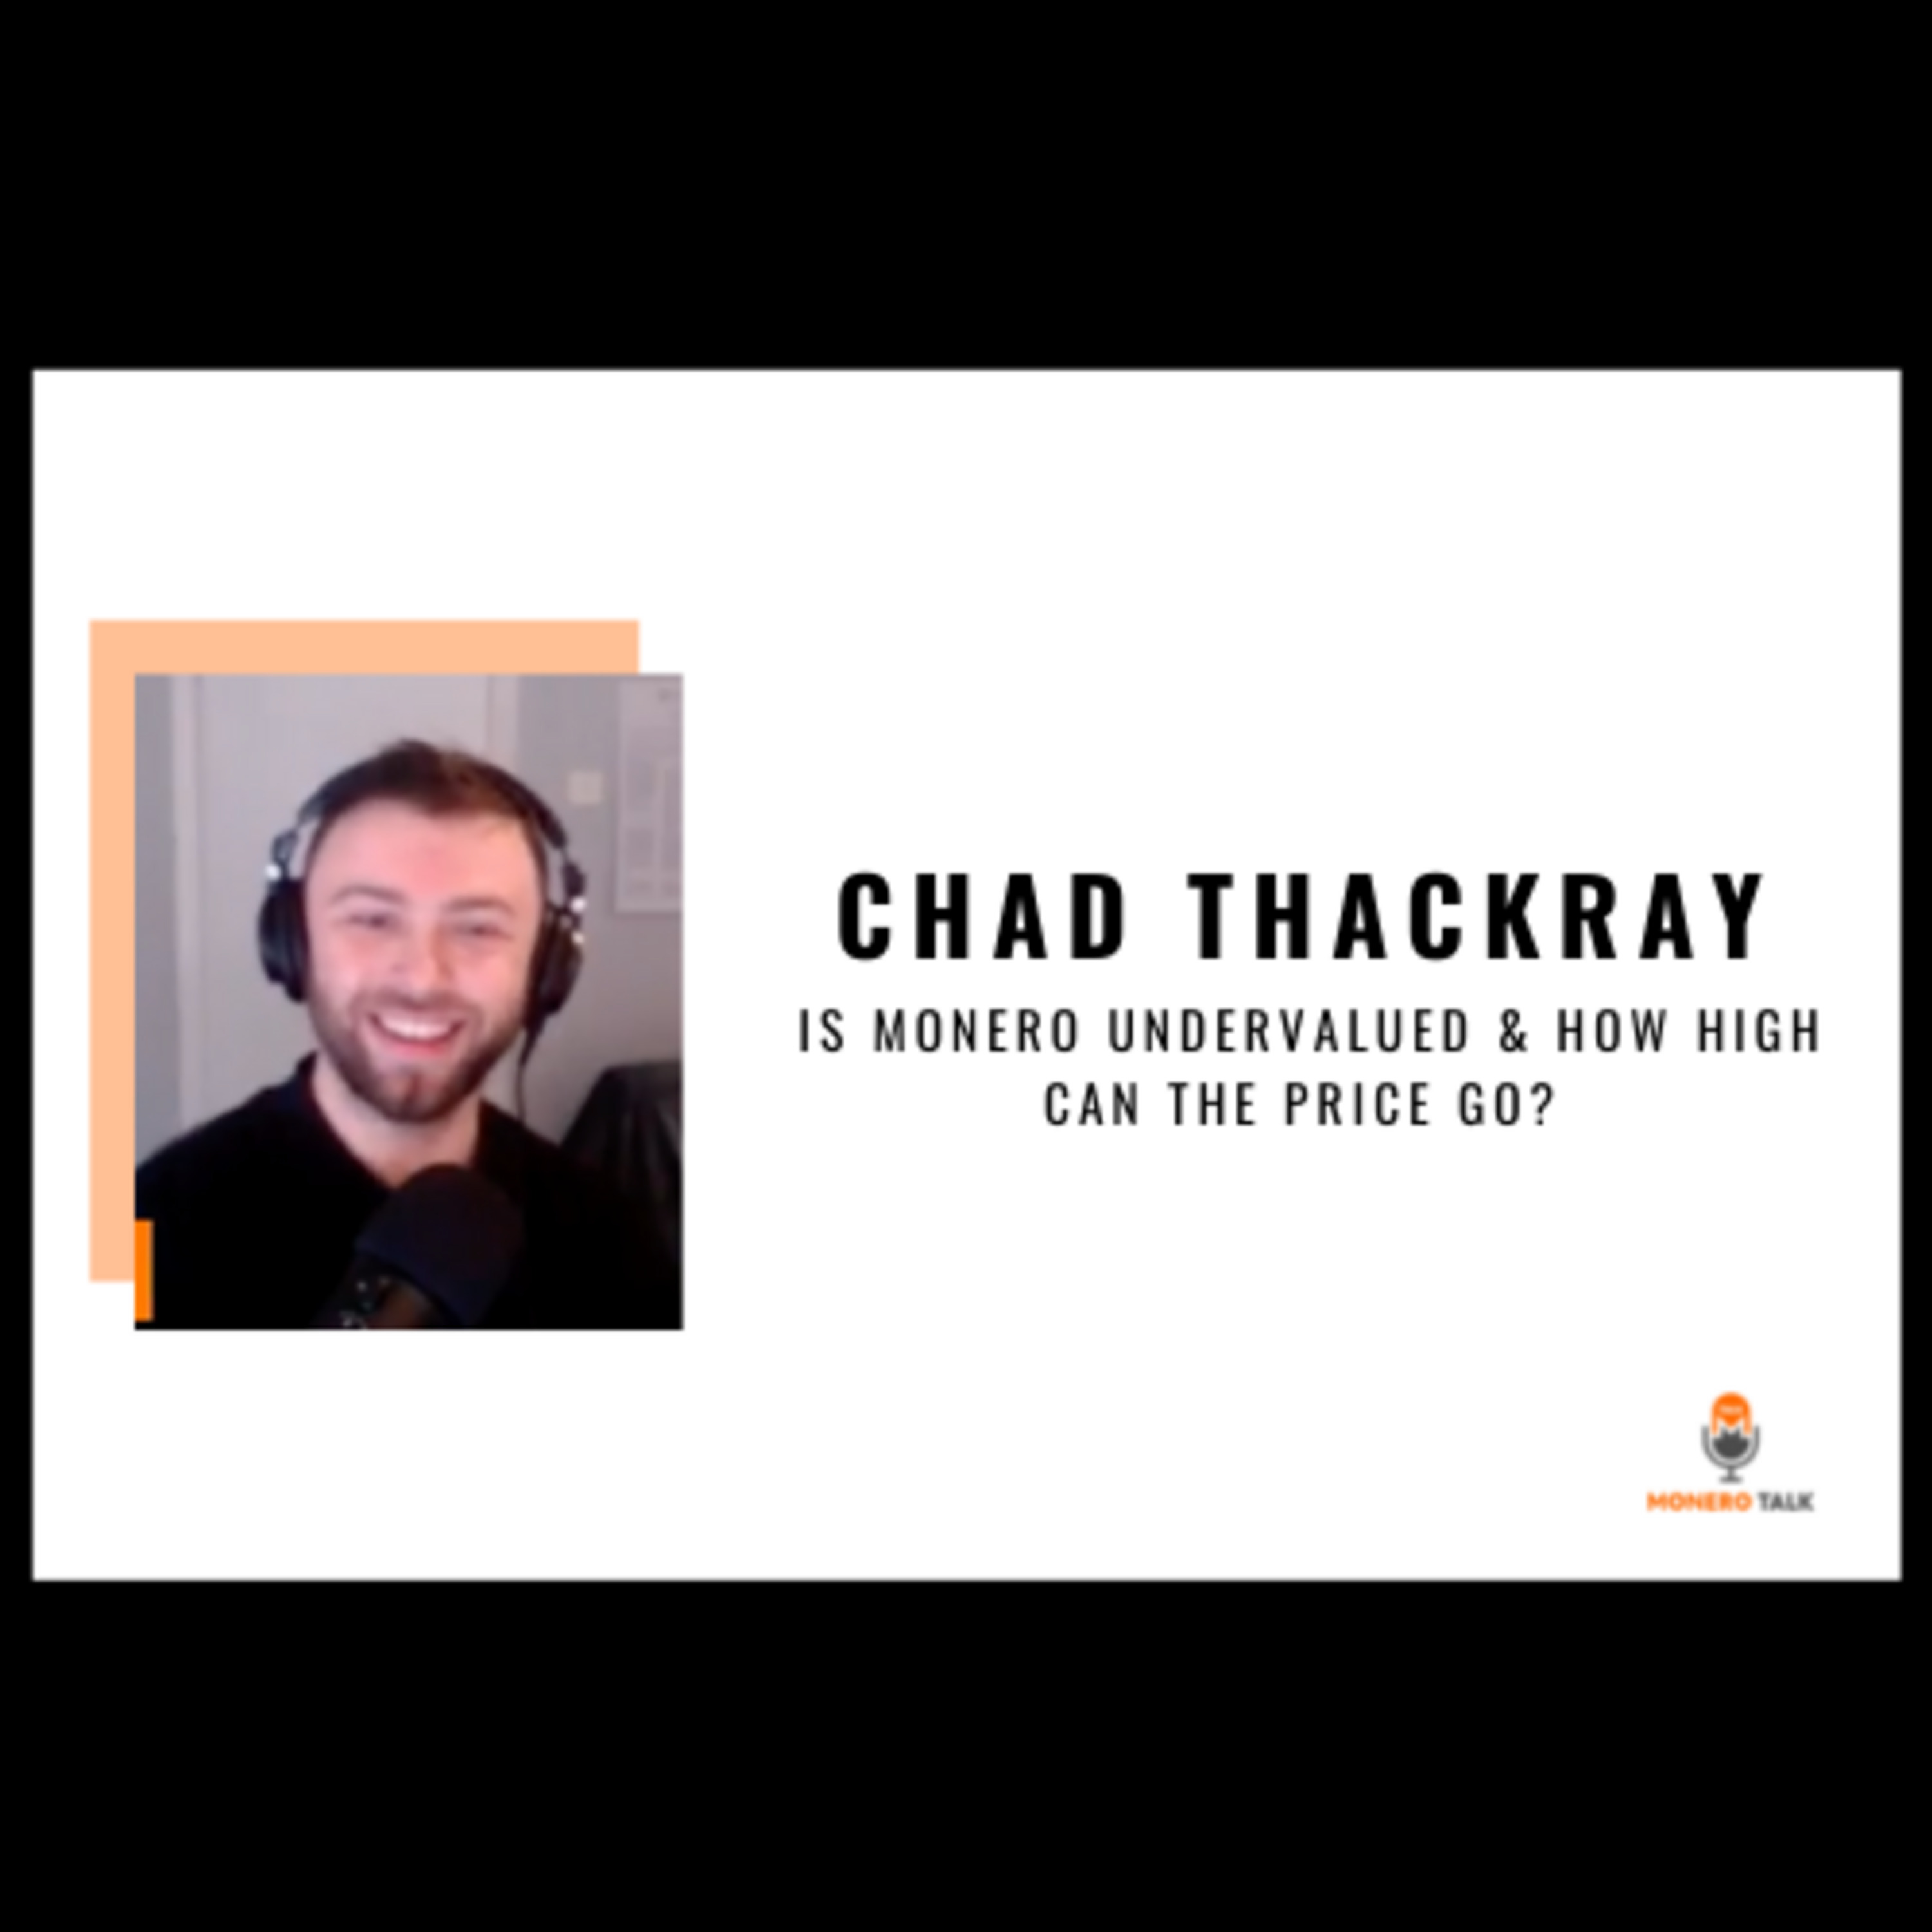 Is Monero undervalued & how high can the price go? with Chad Thackray